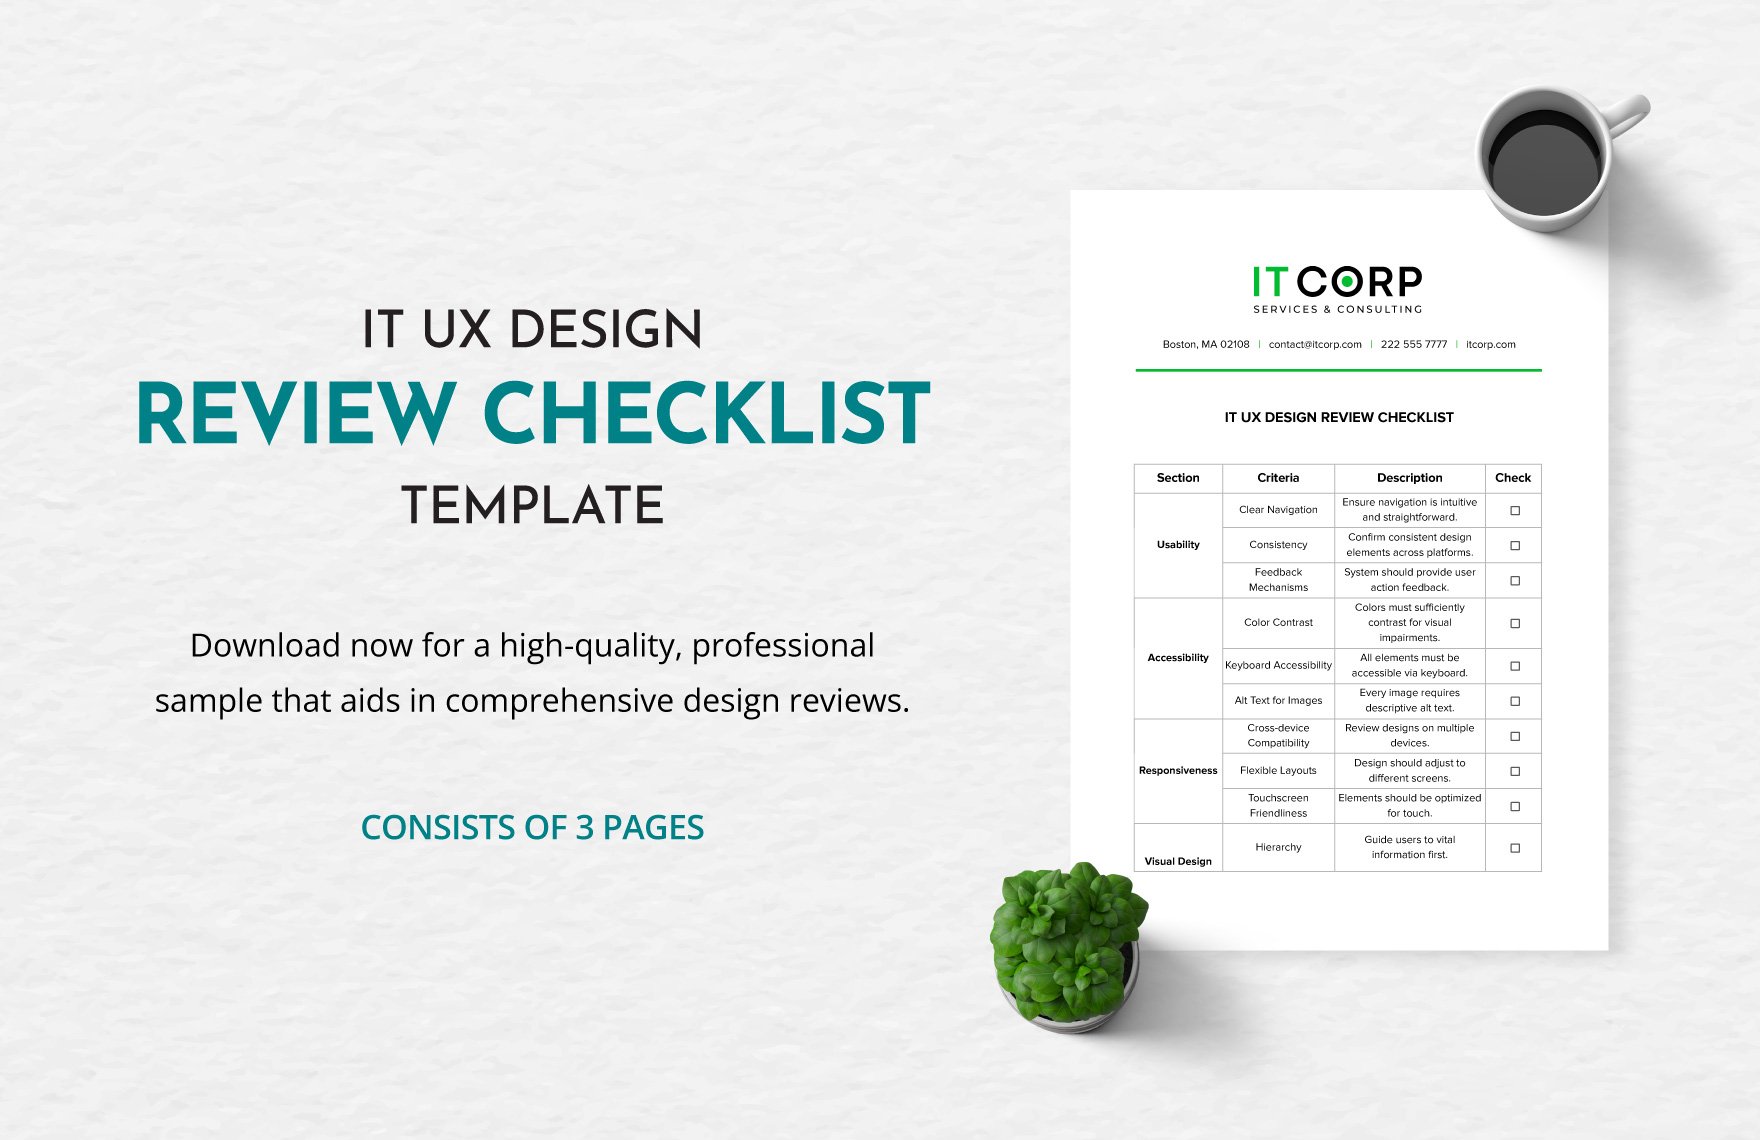 IT UX Design Review Checklist Template in Word, Google Docs, PDF